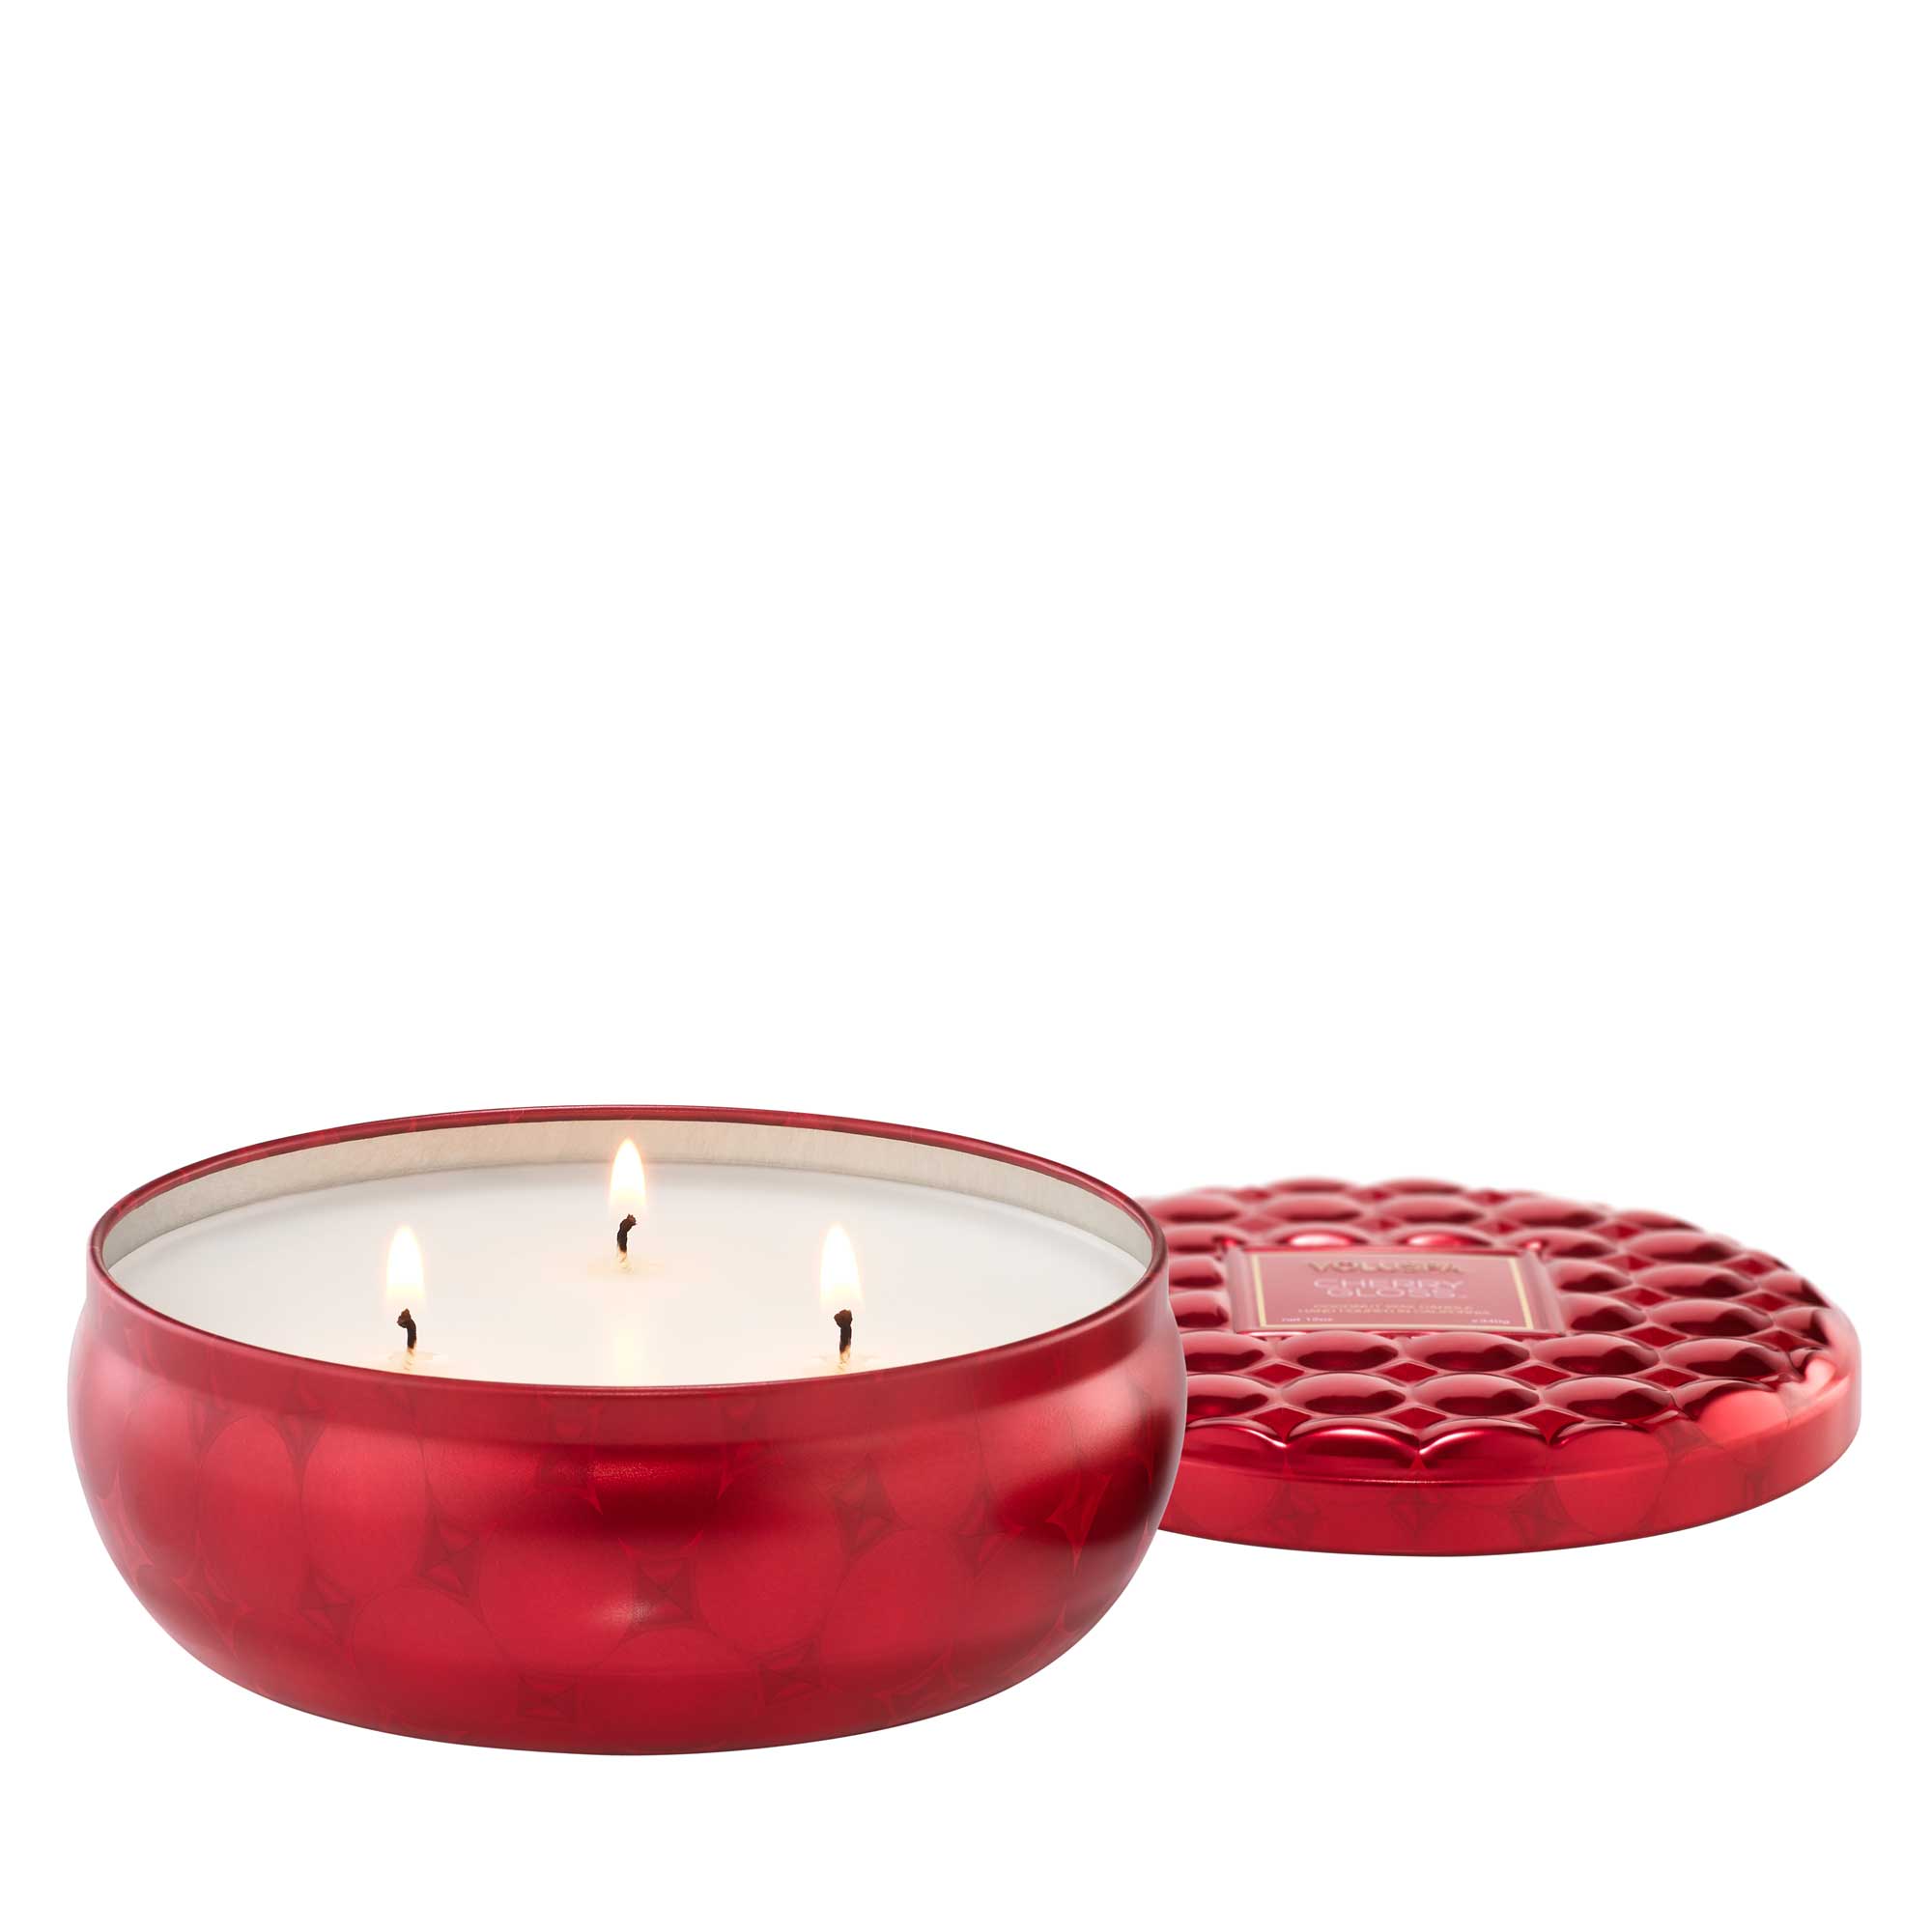 Voluspa Limited Editon Capsule Collection 3 Wick 12oz Candle - Cherry Gloss / Cherry Gloss